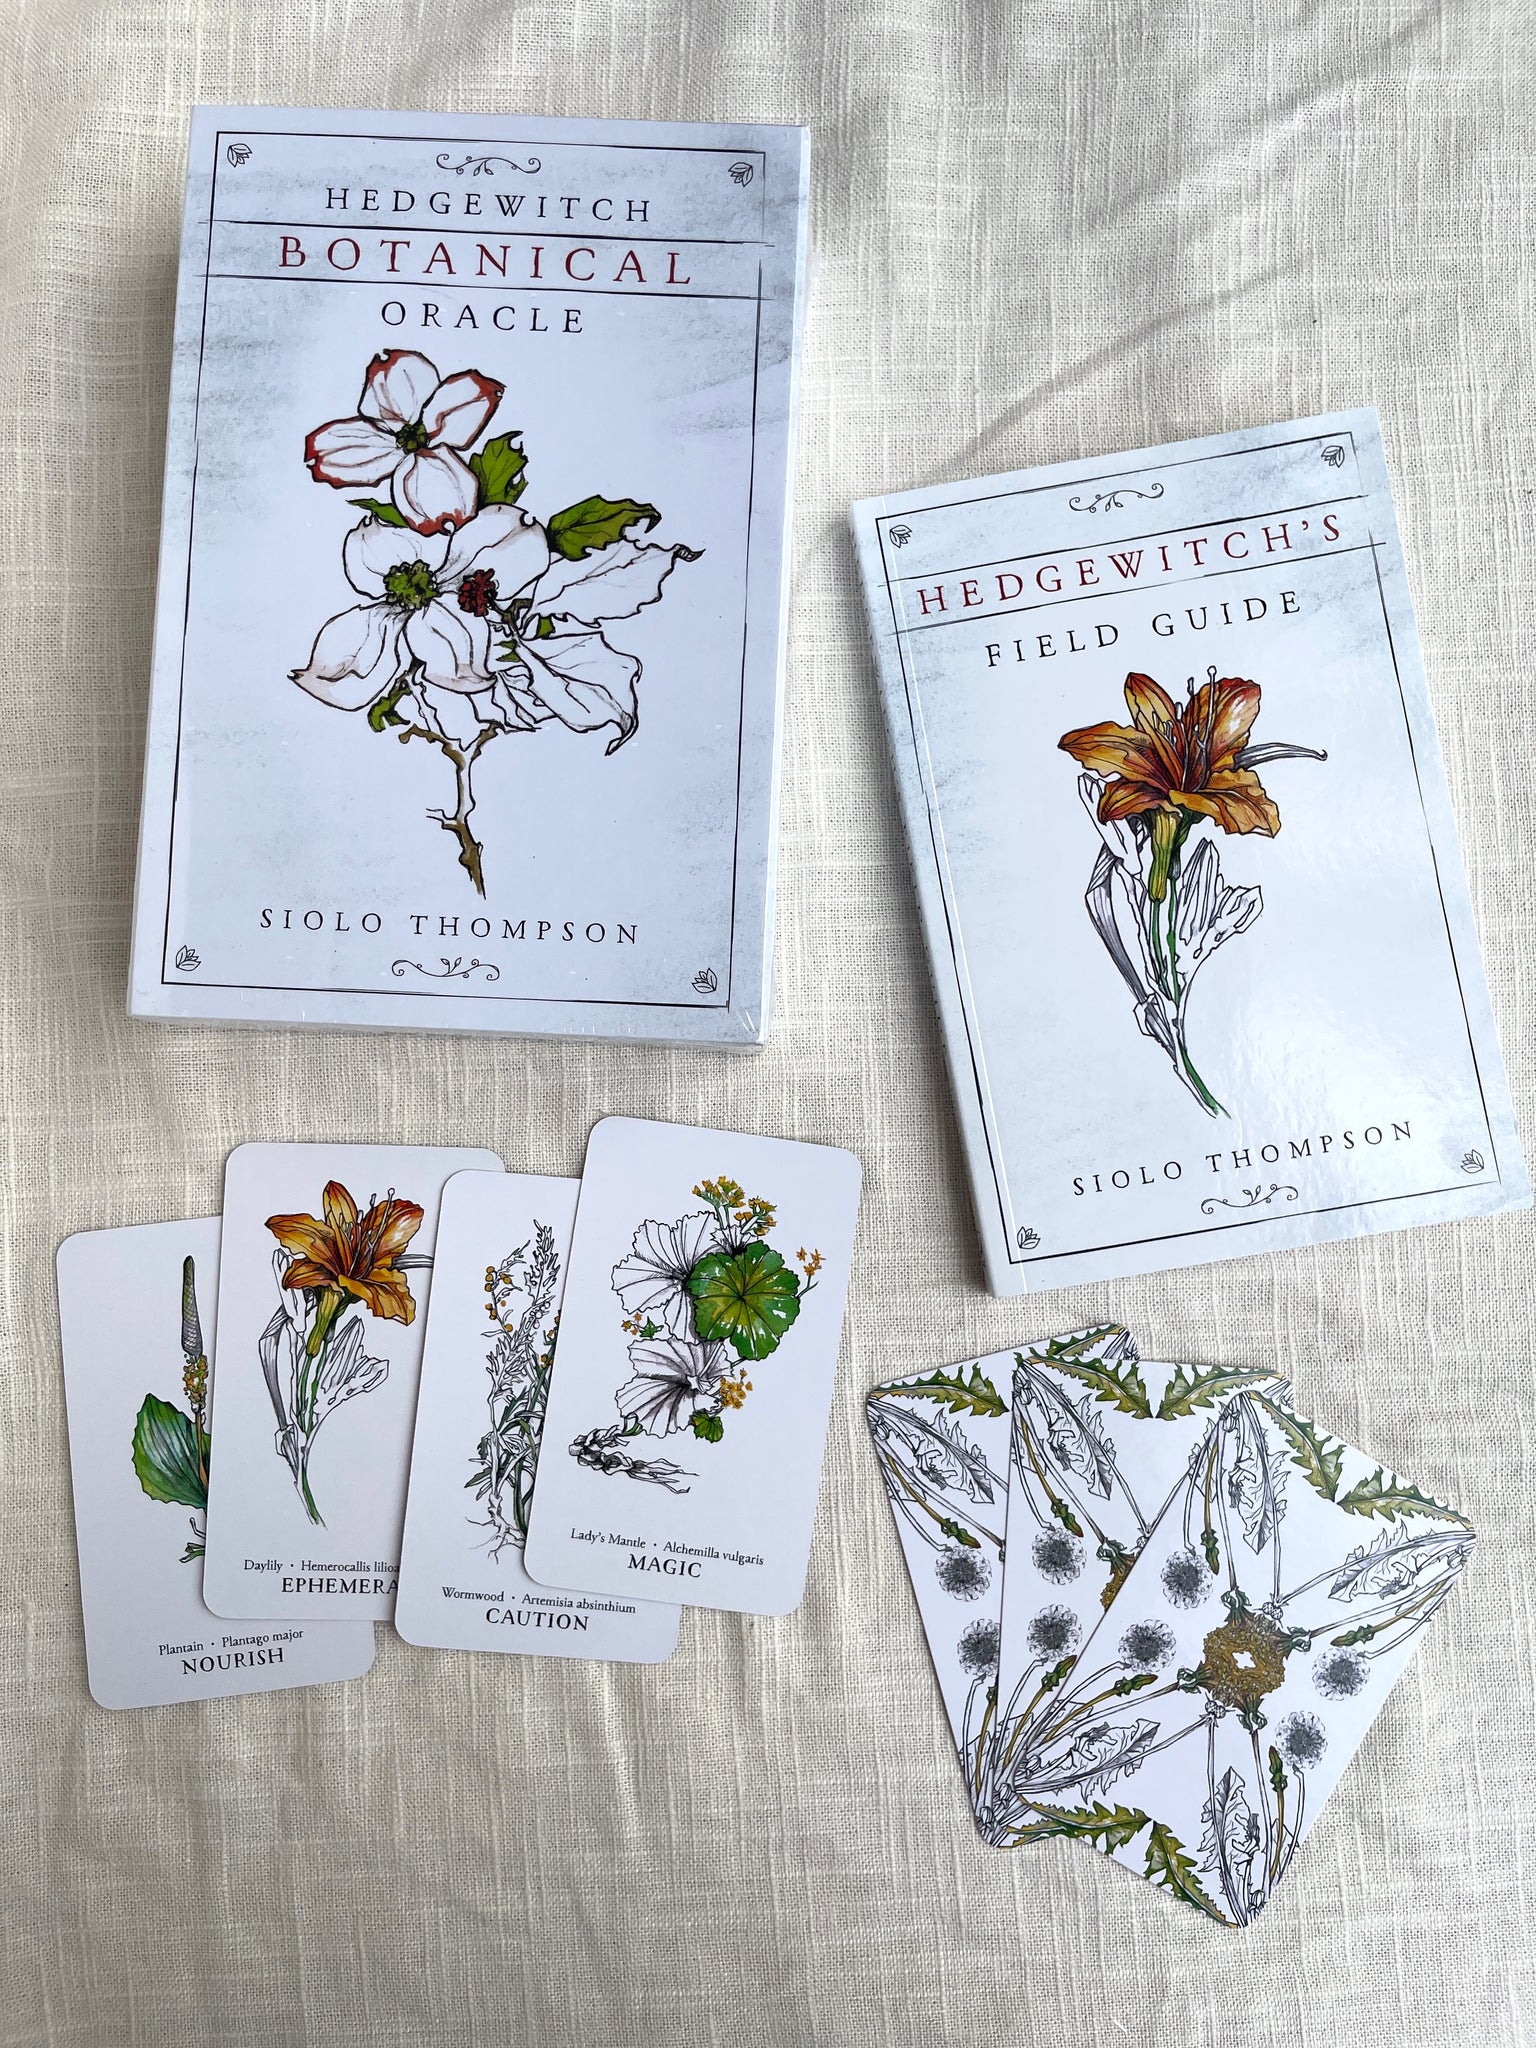 Hedgewitch Botanical Oracle deck